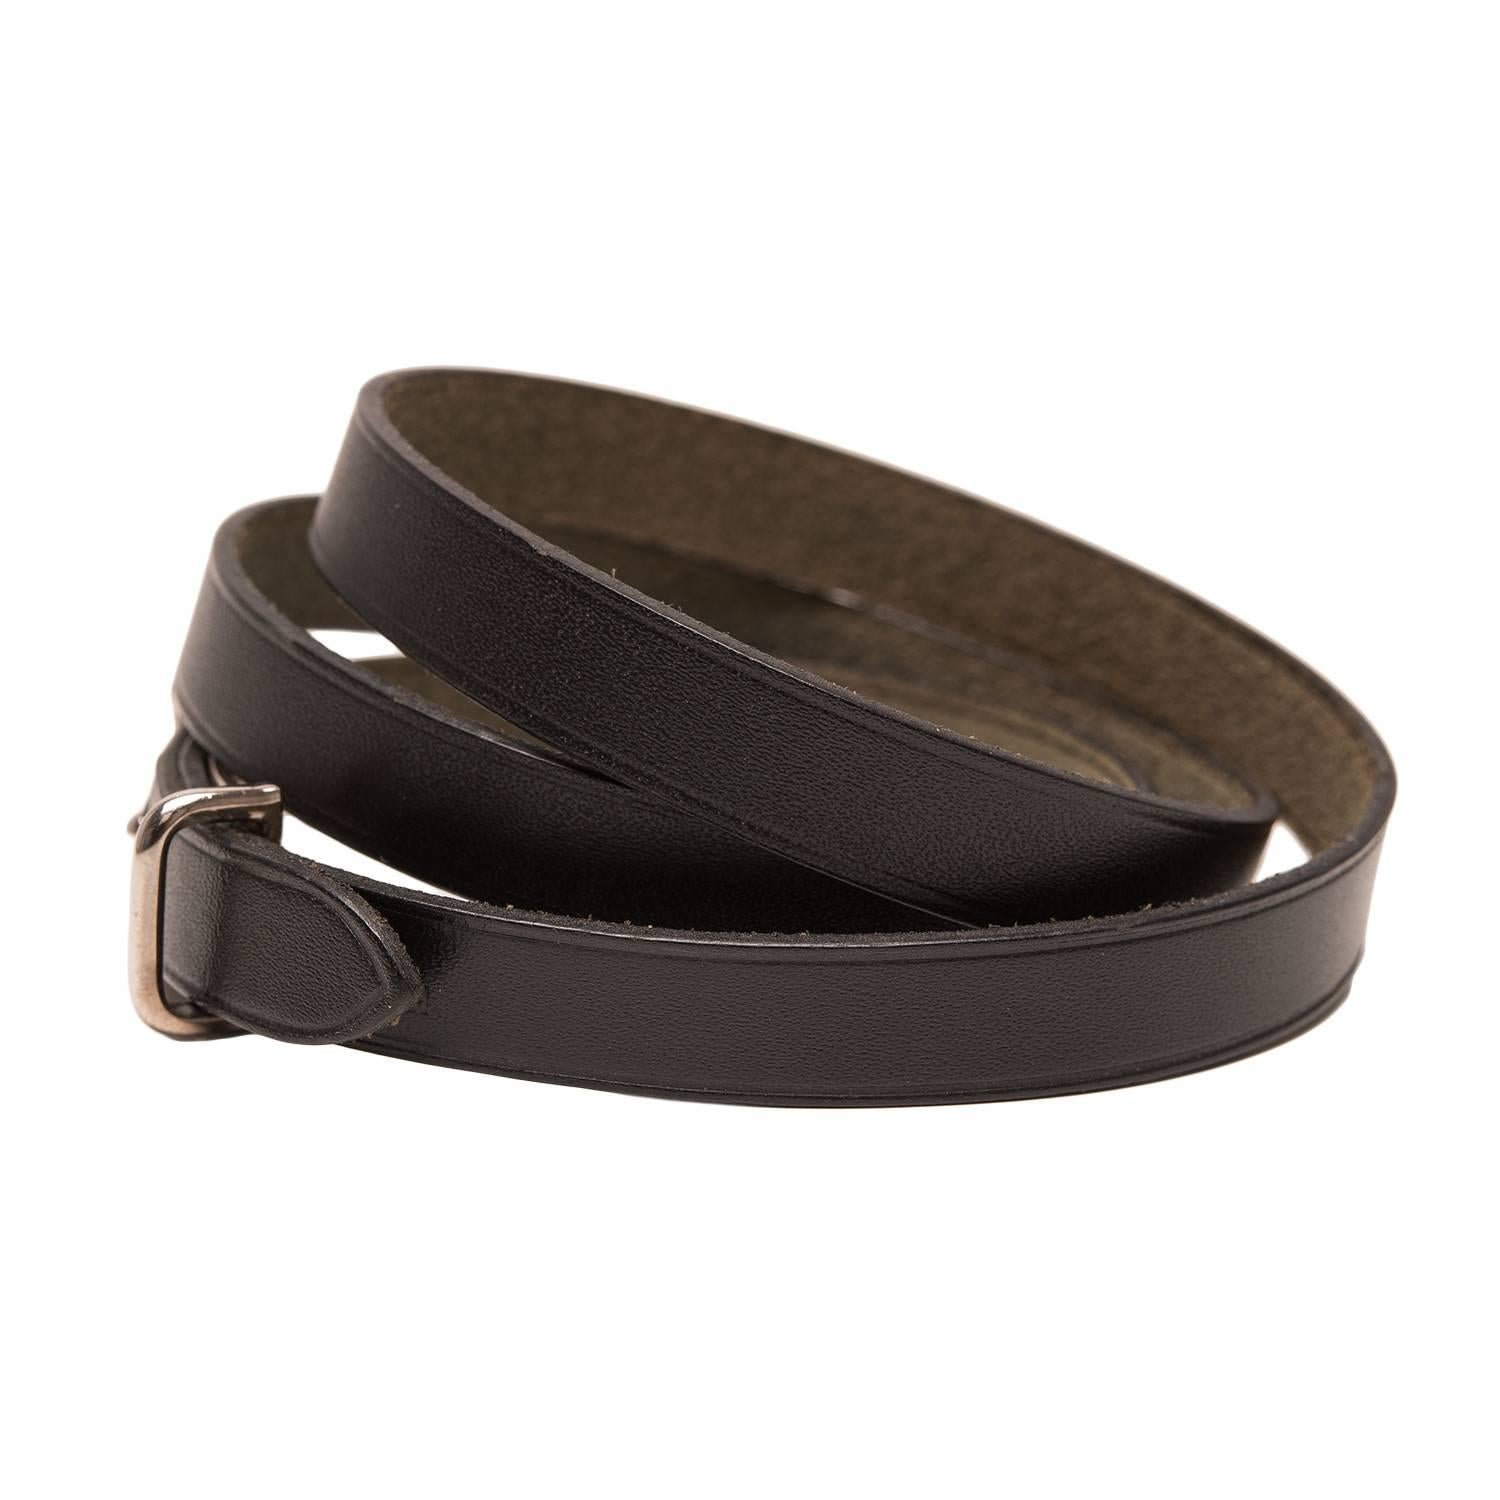 Hermes black calfskin leather quadruple wrap bracelet.

It is with silver and palladium plated hardware.

Origin: France

Condition: Preowned; mint

Accompanied by: Hermes box

Measurements: Length (total): 28.25in; Width:  .375in